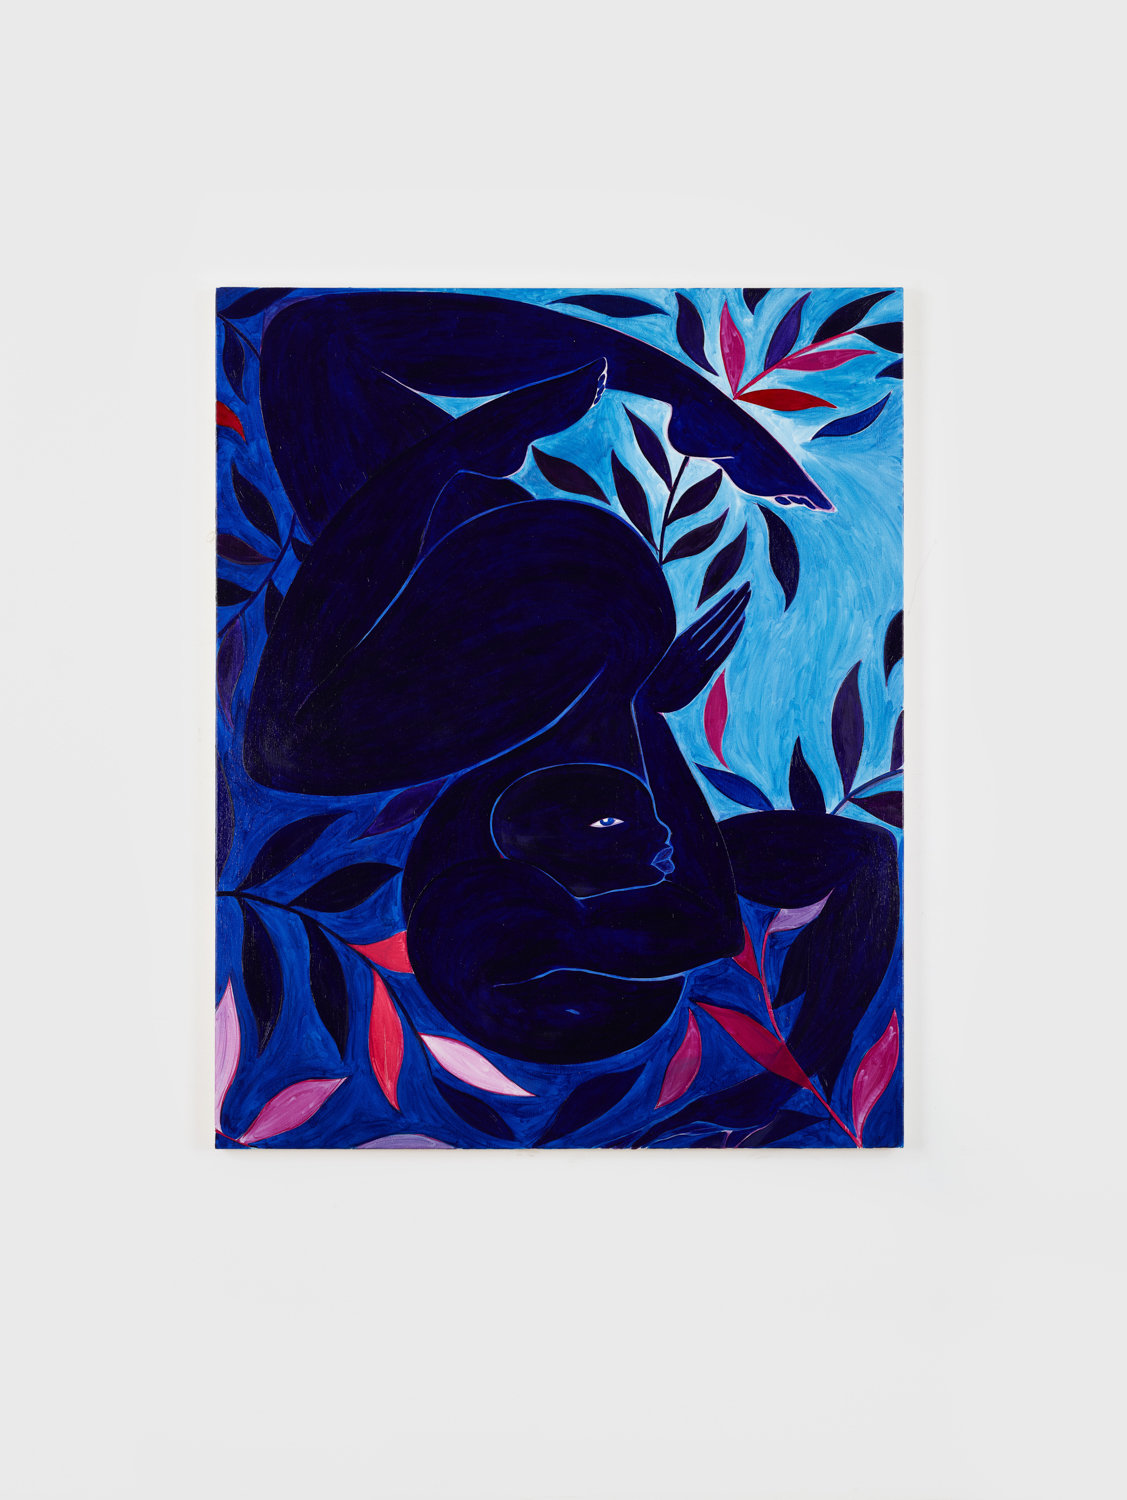 Tunji Adeniyi-Jones’ painting ‘Blue Dancer’ is included in the group exhibition ‘Young, Gifted and Black,’ which presents a range of work by artists both well established and new. The show is on display at the Lehman College Art Gallery through May 2.